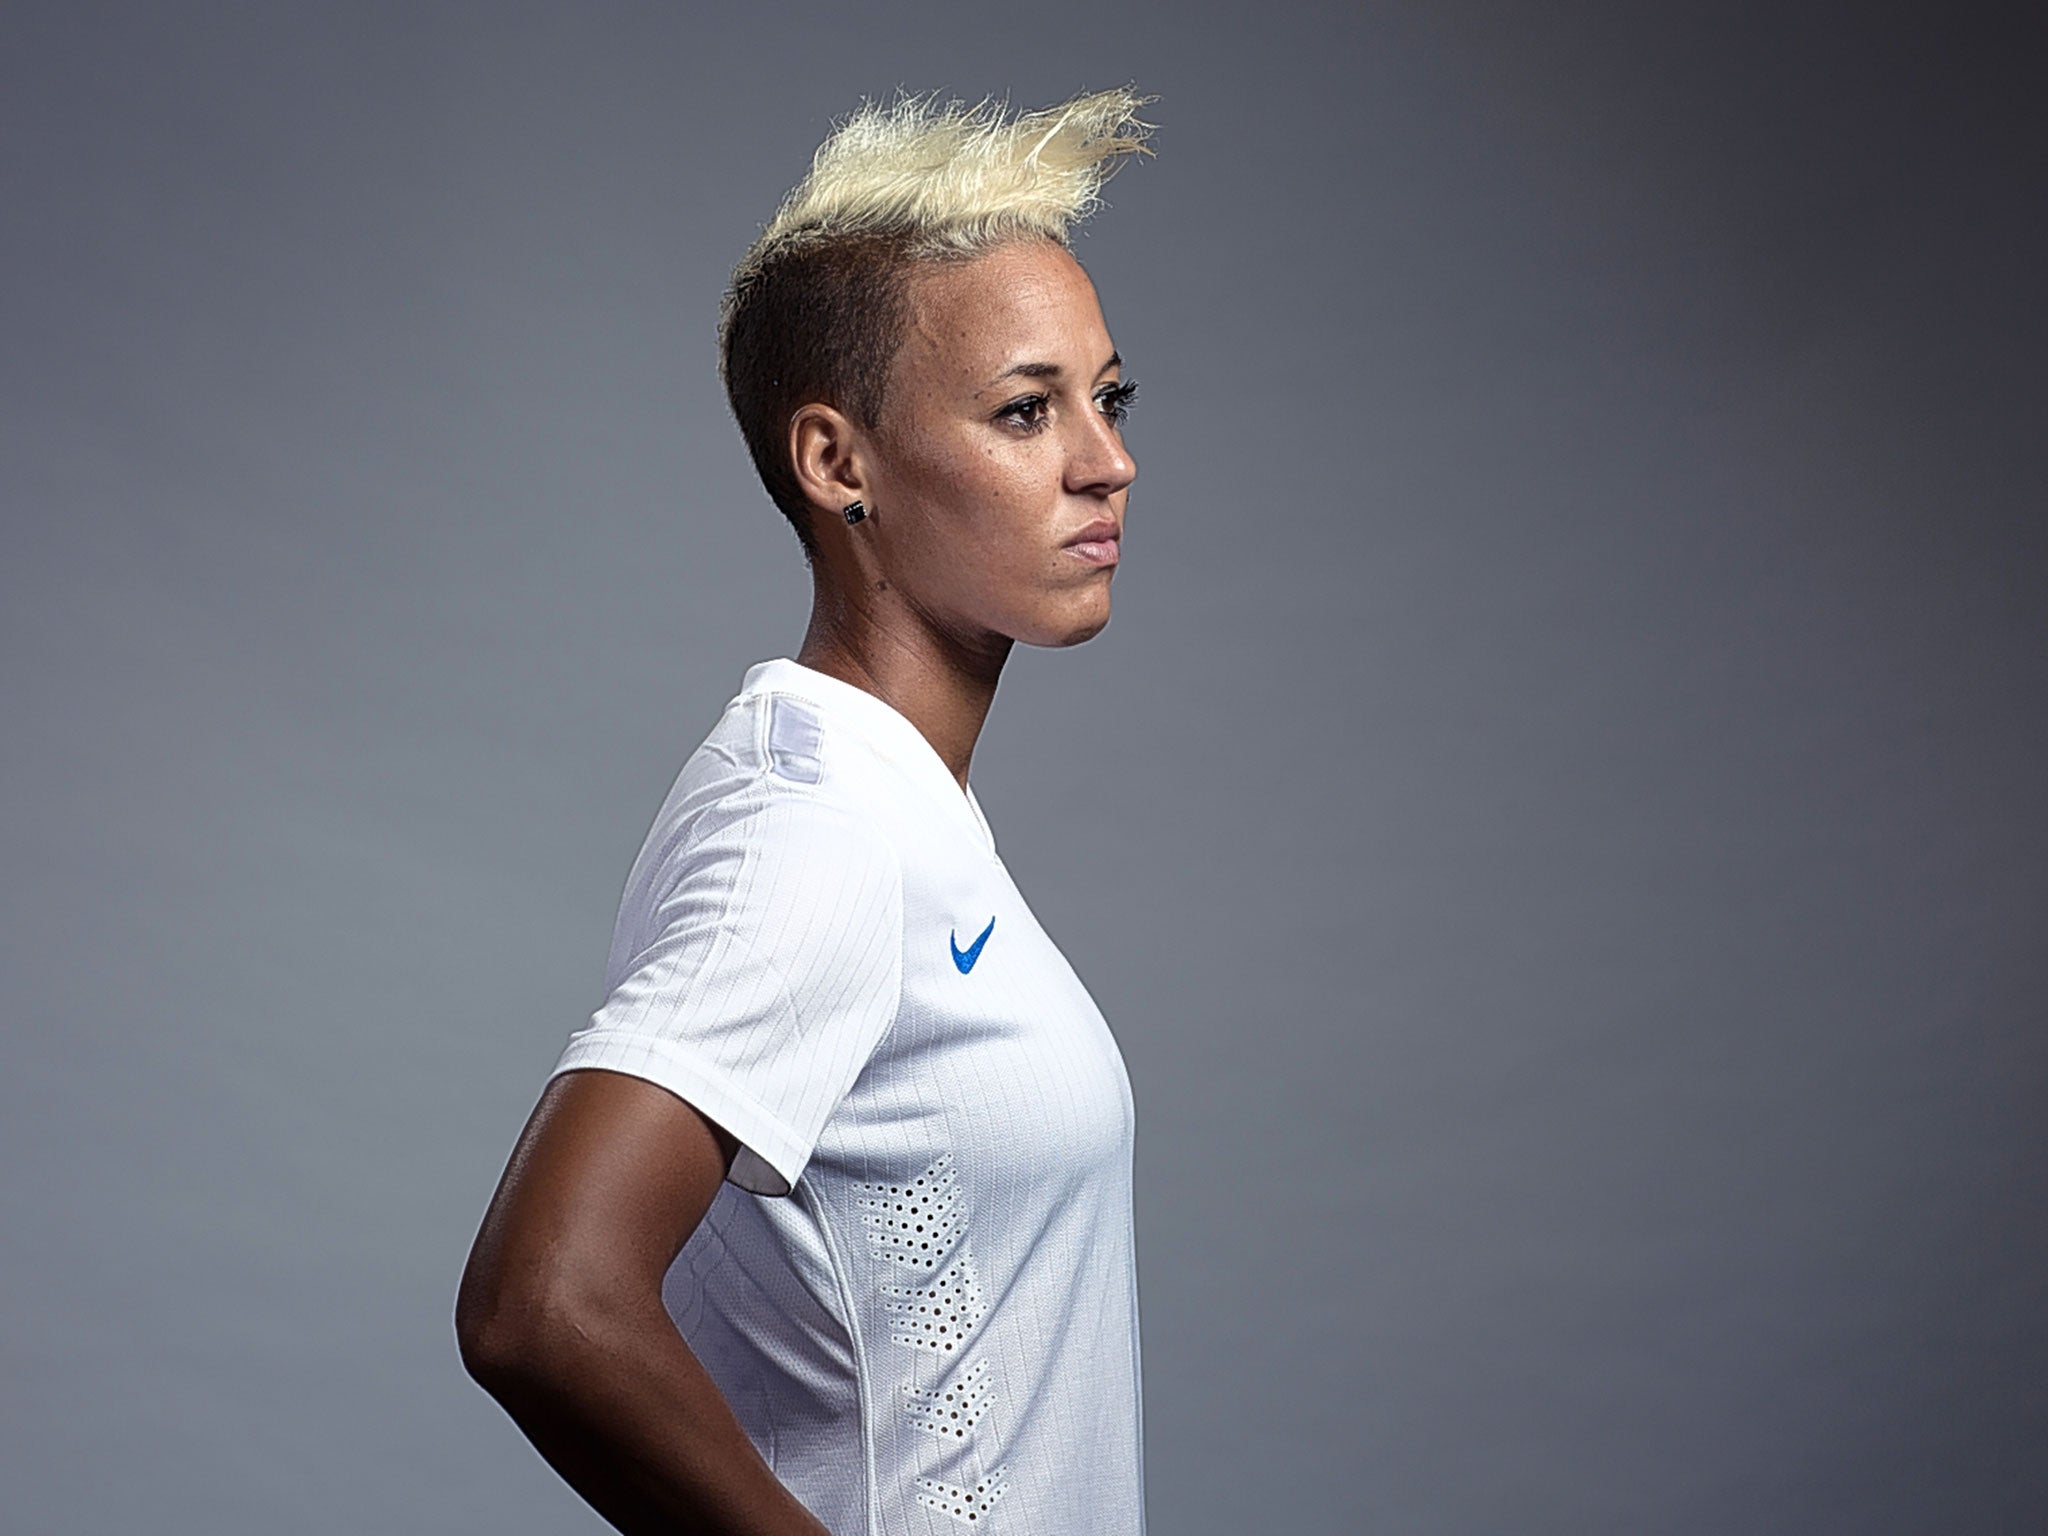 Lianne Sanderson was persuaded to return to the England team by manager Mark Sampson and recently rejoined Arsenal, having left in 2008